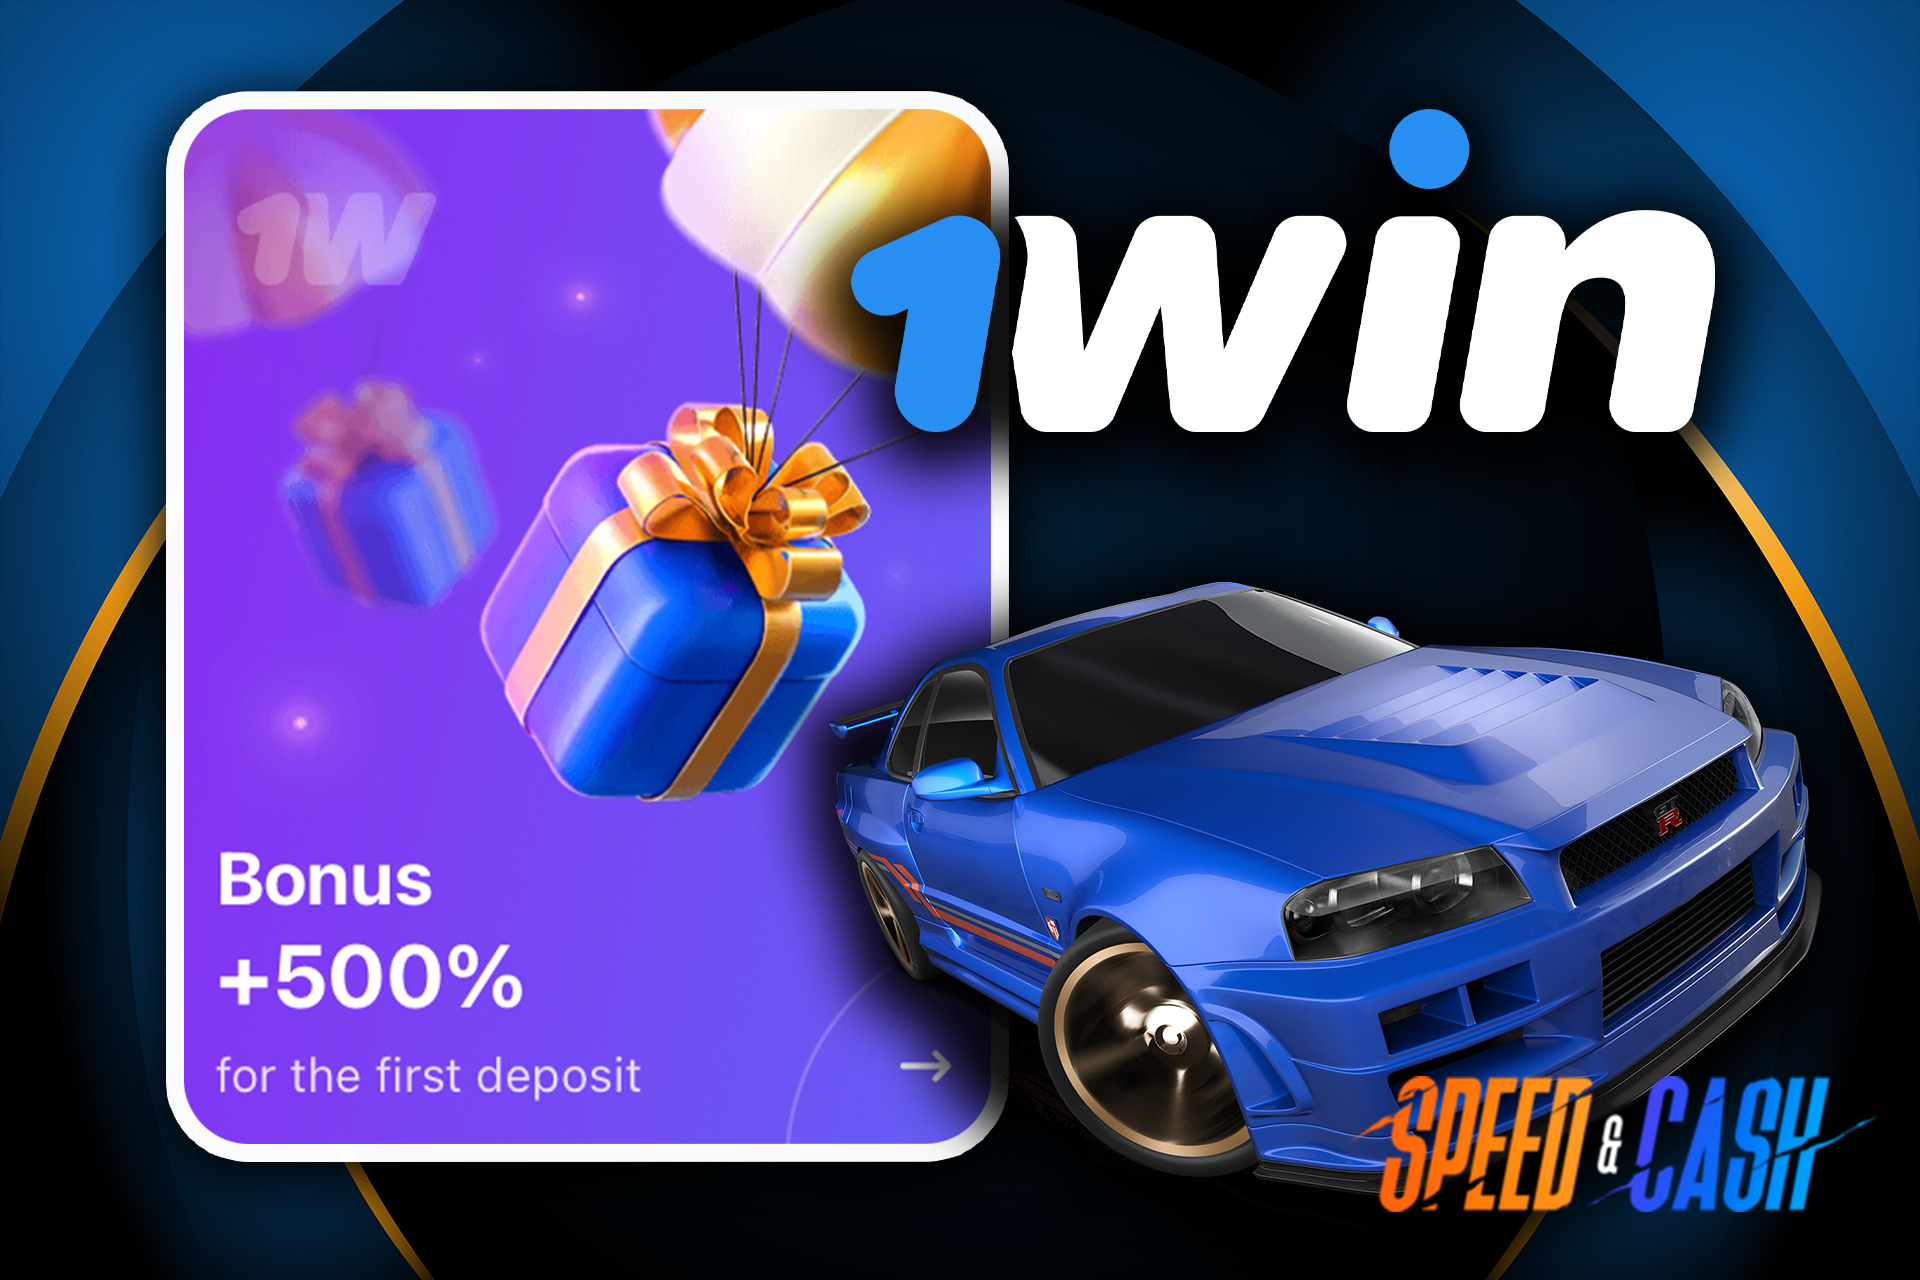 1win offers a welcome bonus up to 500% on your first deposit.